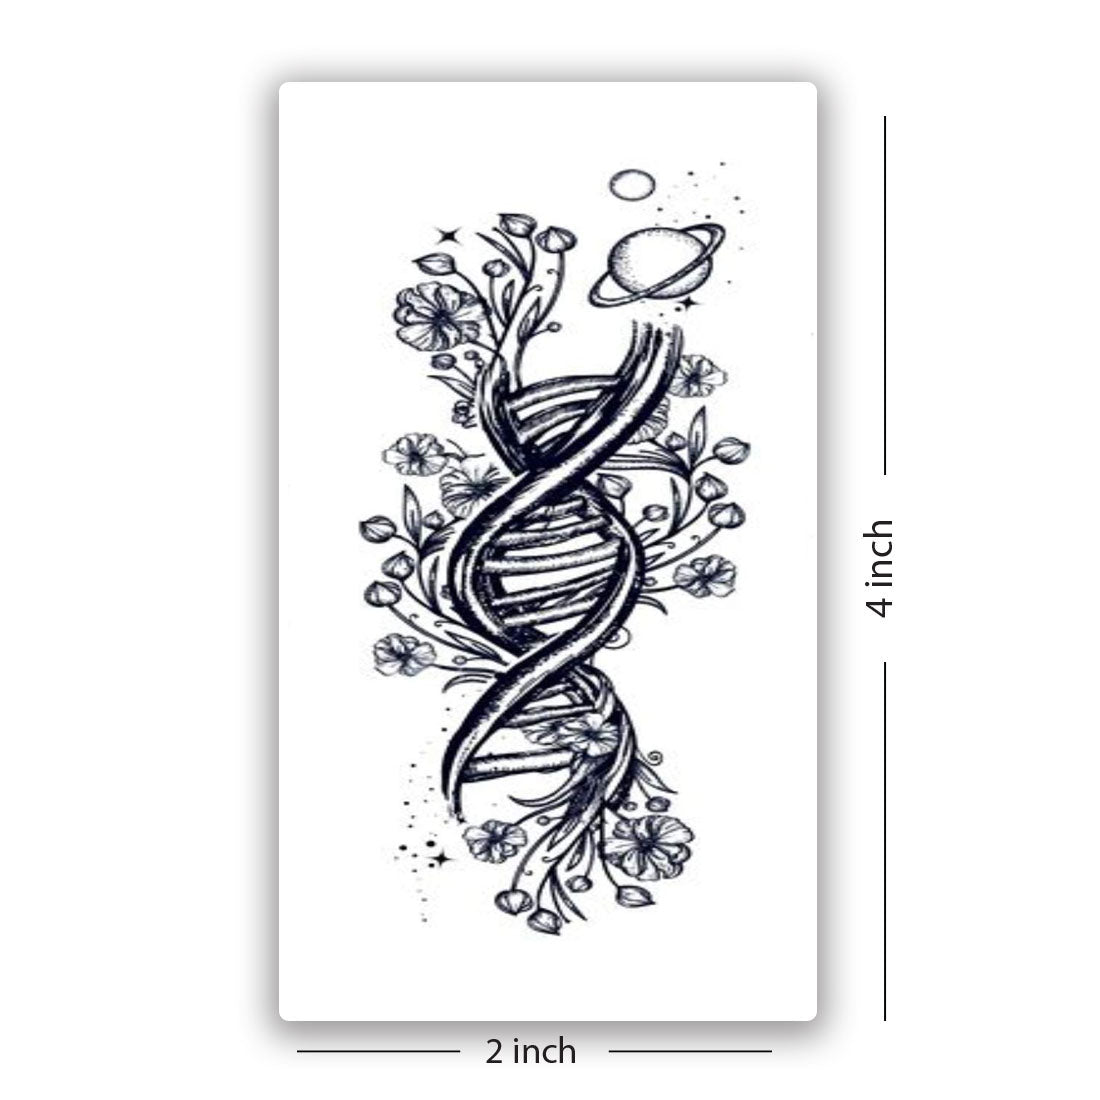 DNA Tattoo by ComaBlue on DeviantArt